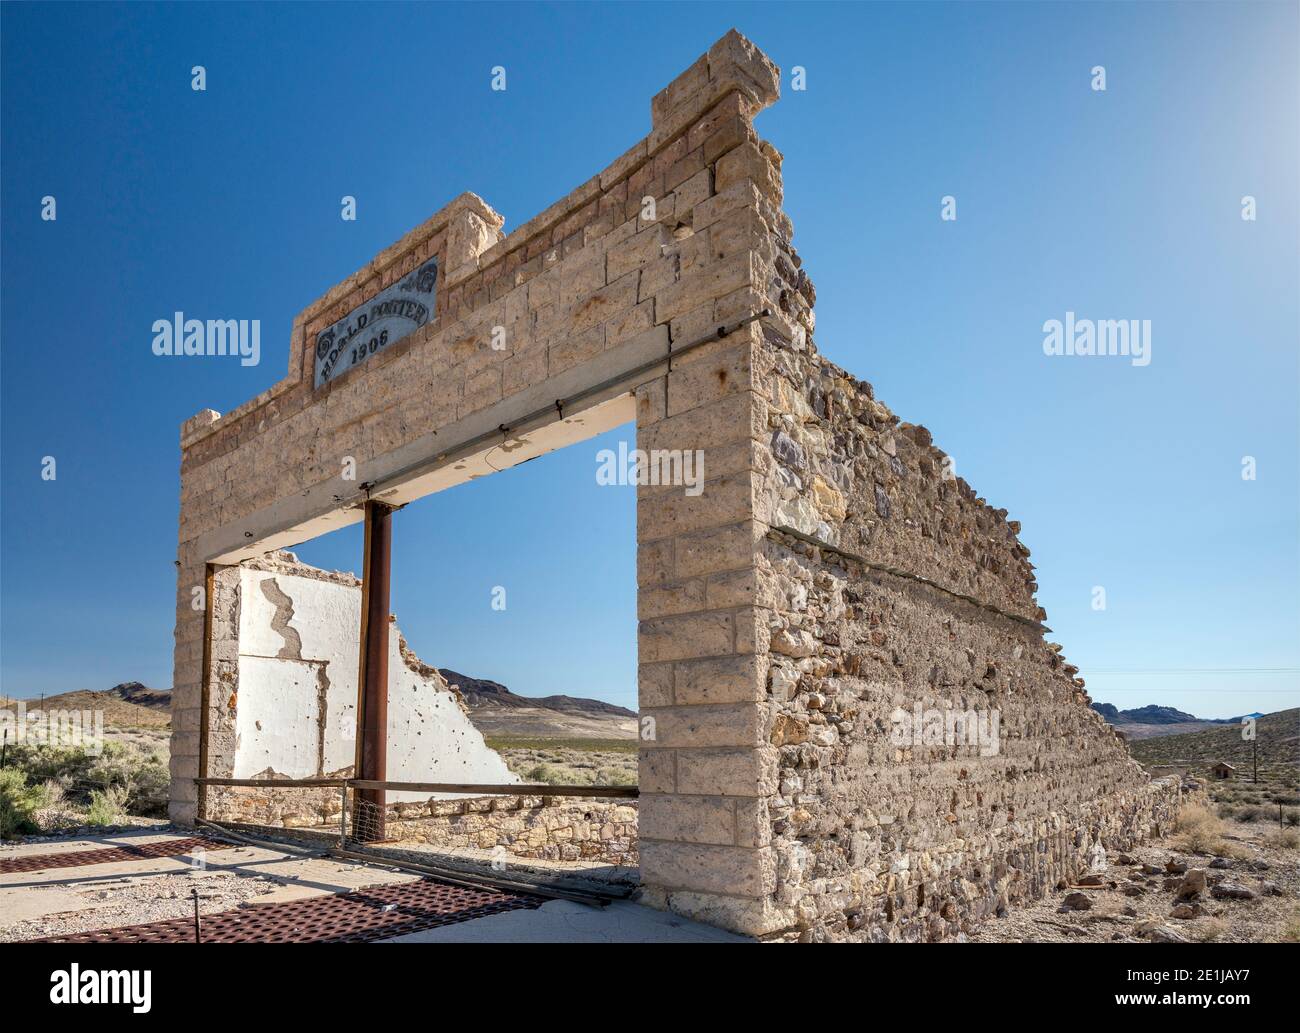 Ruin in ghost town of Rhyolite near Beatty and Death Valley, in Amargosa Desert, Nevada, USA Stock Photo